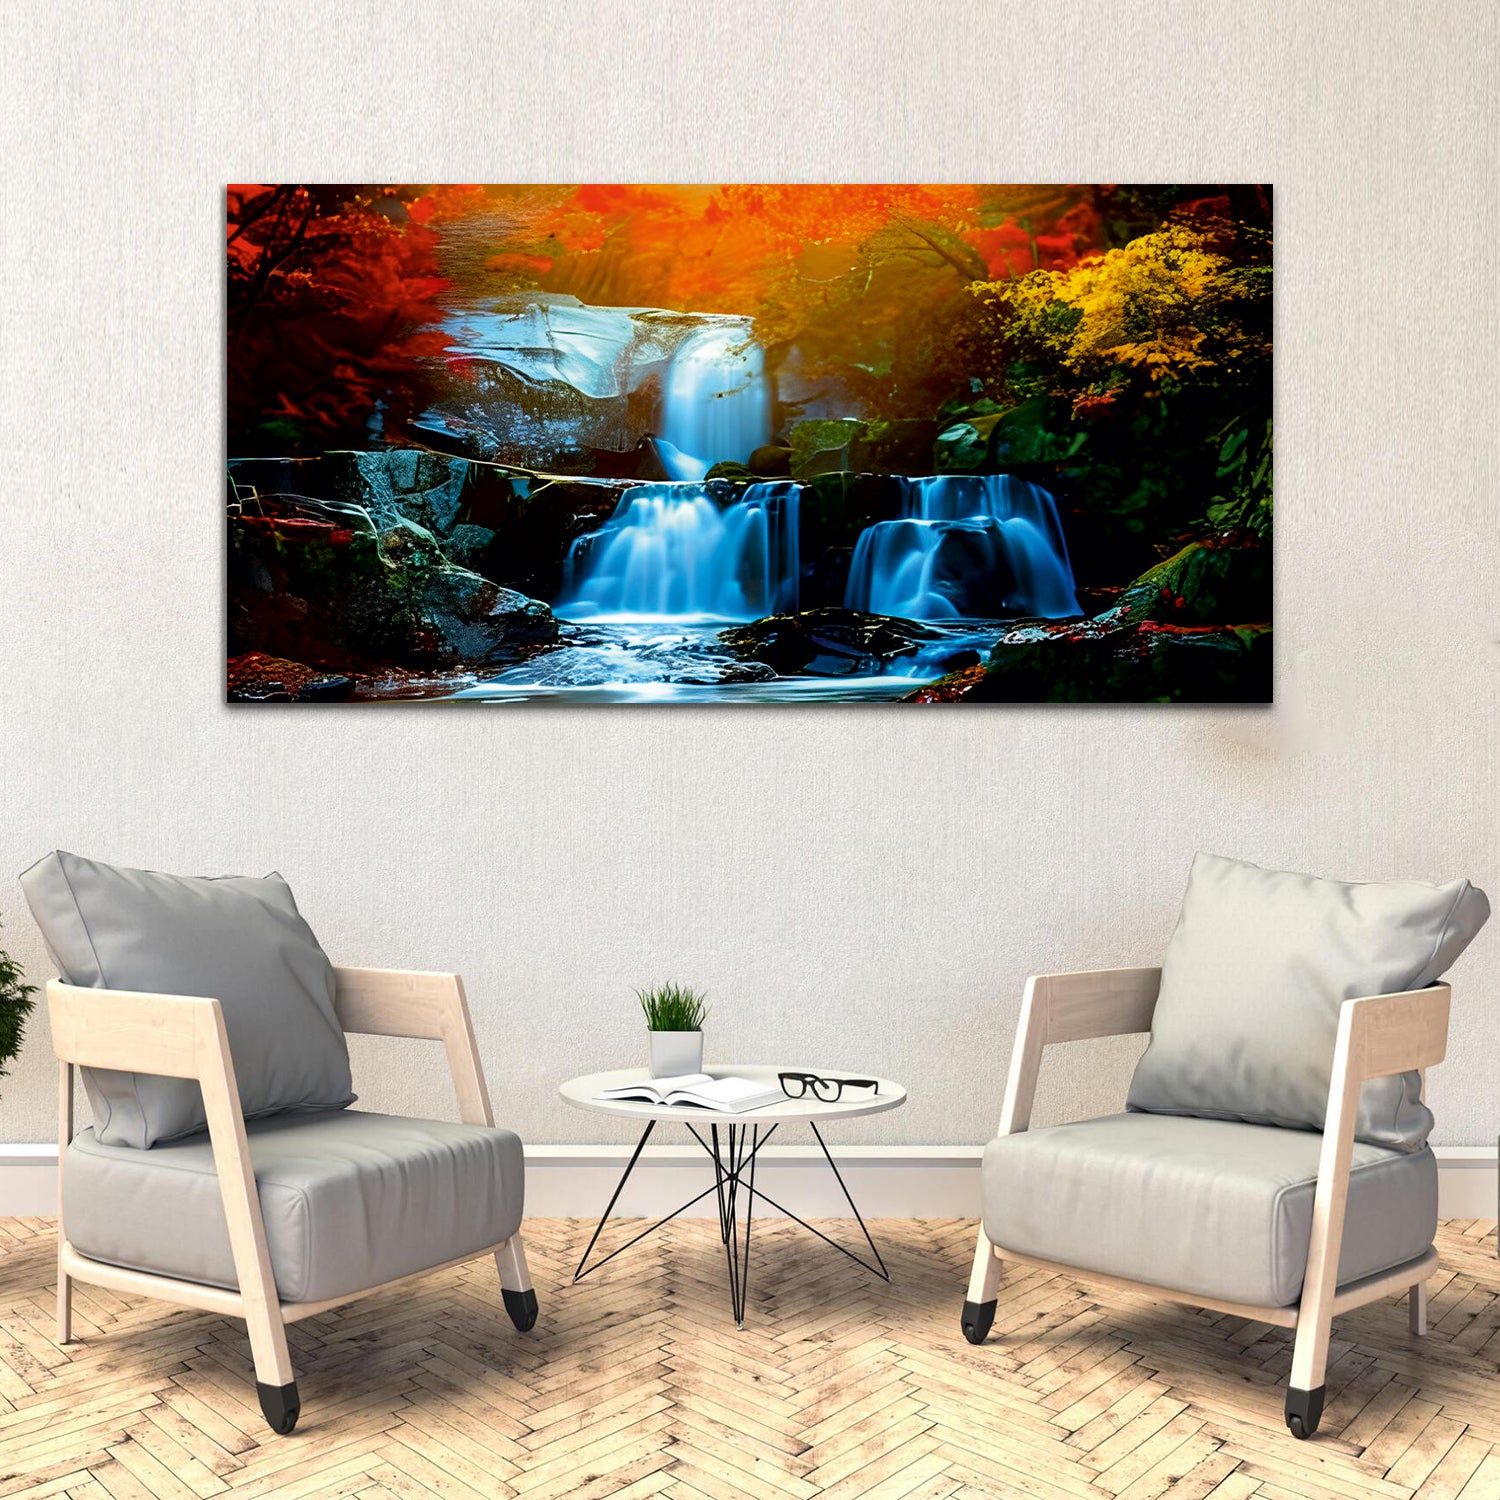 Autumn leaves and waterfall living bed room Canvas Wall Painting